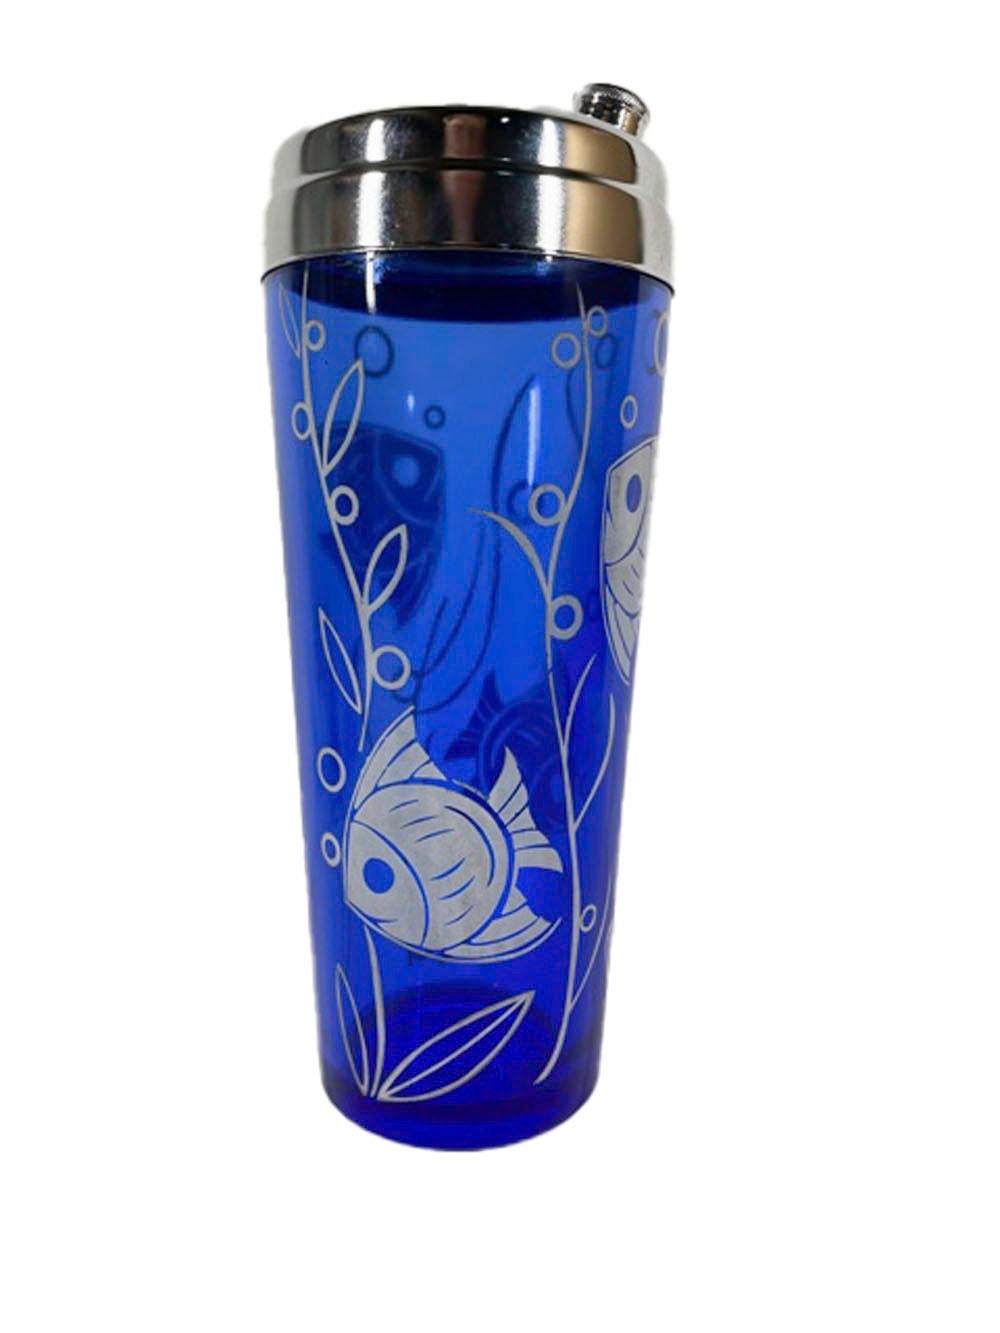 American Art Deco Cobalt Cocktail Shaker and Glasses with Tropical Fish by Hazel-Atlas For Sale